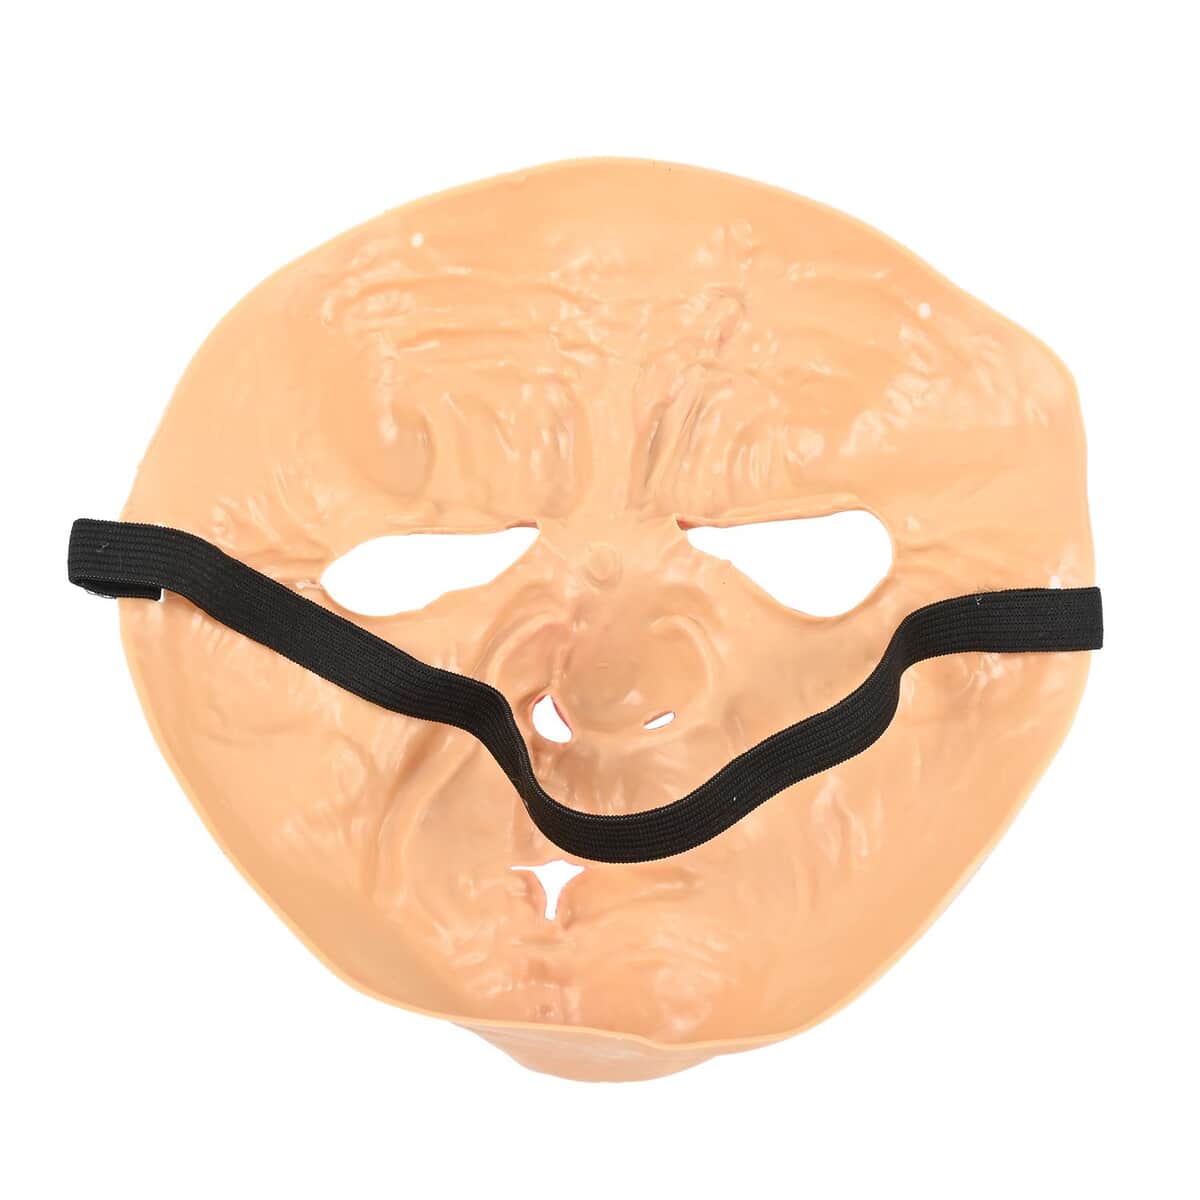 Halloween- Scary Rubber Scar Face Mask w/ Tie on Cord image number 4